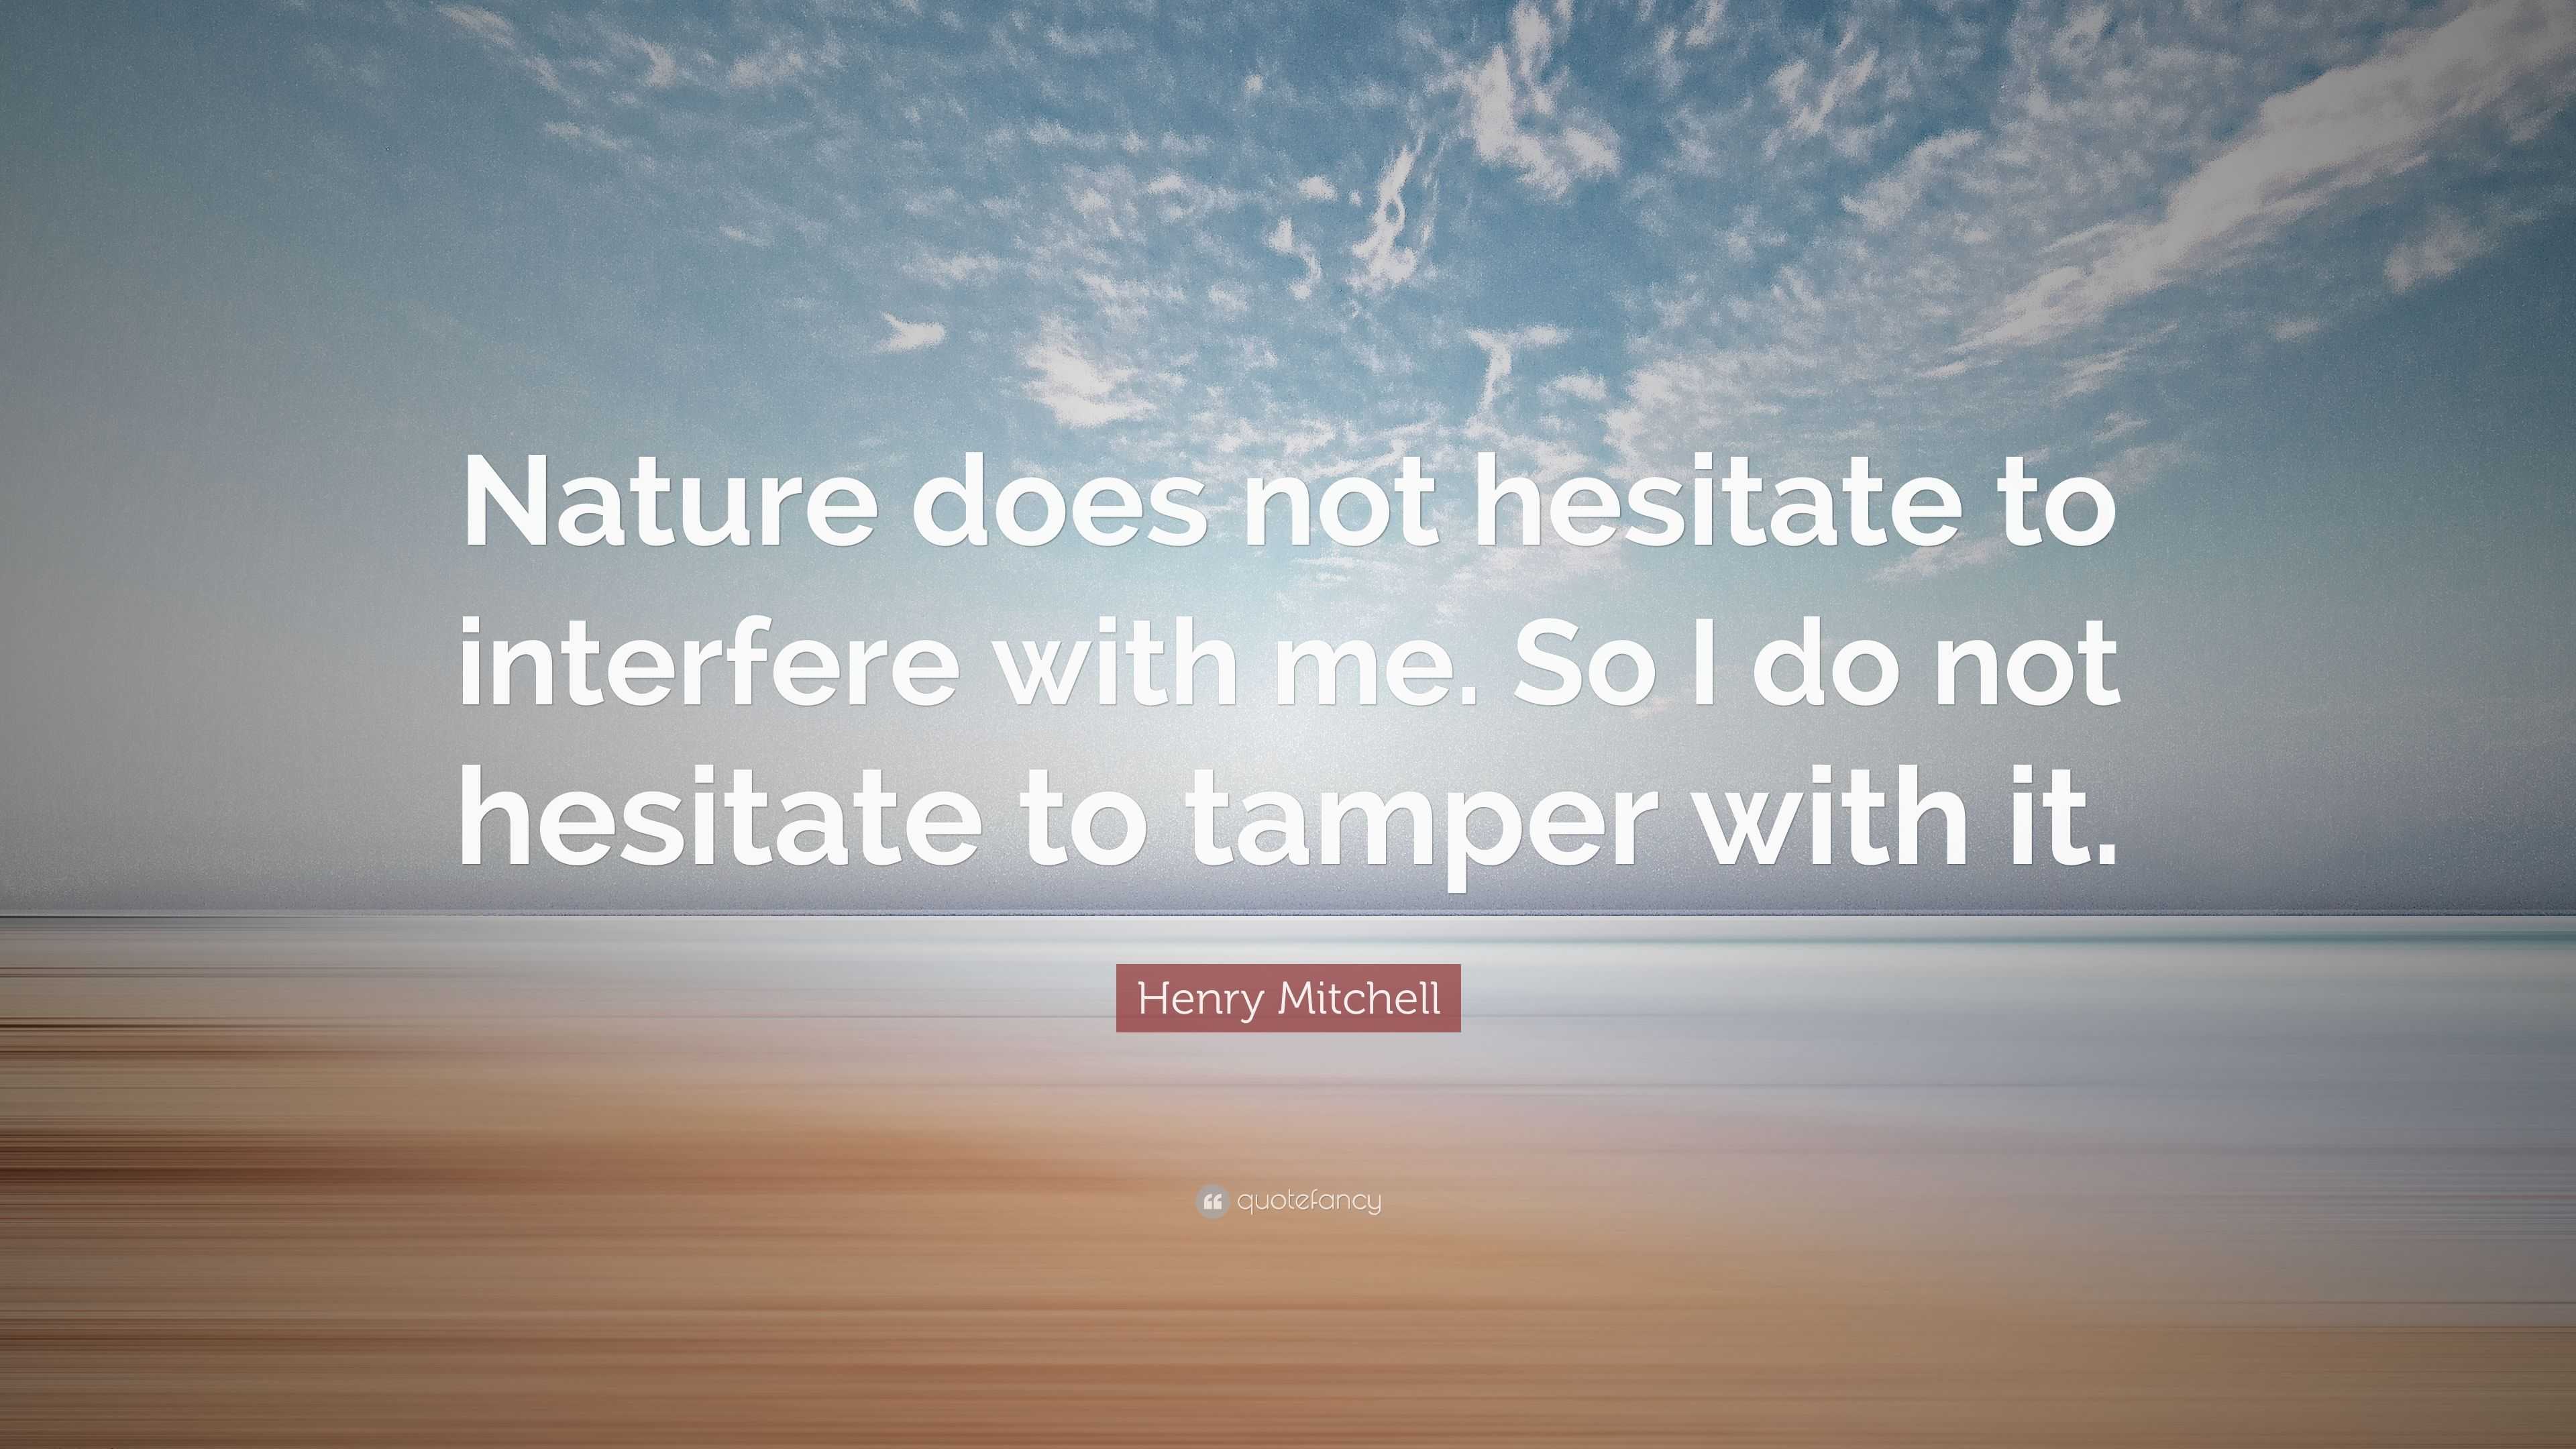 Henry Mitchell Quote: “Nature does hesitate to interfere with me. So I do not hesitate